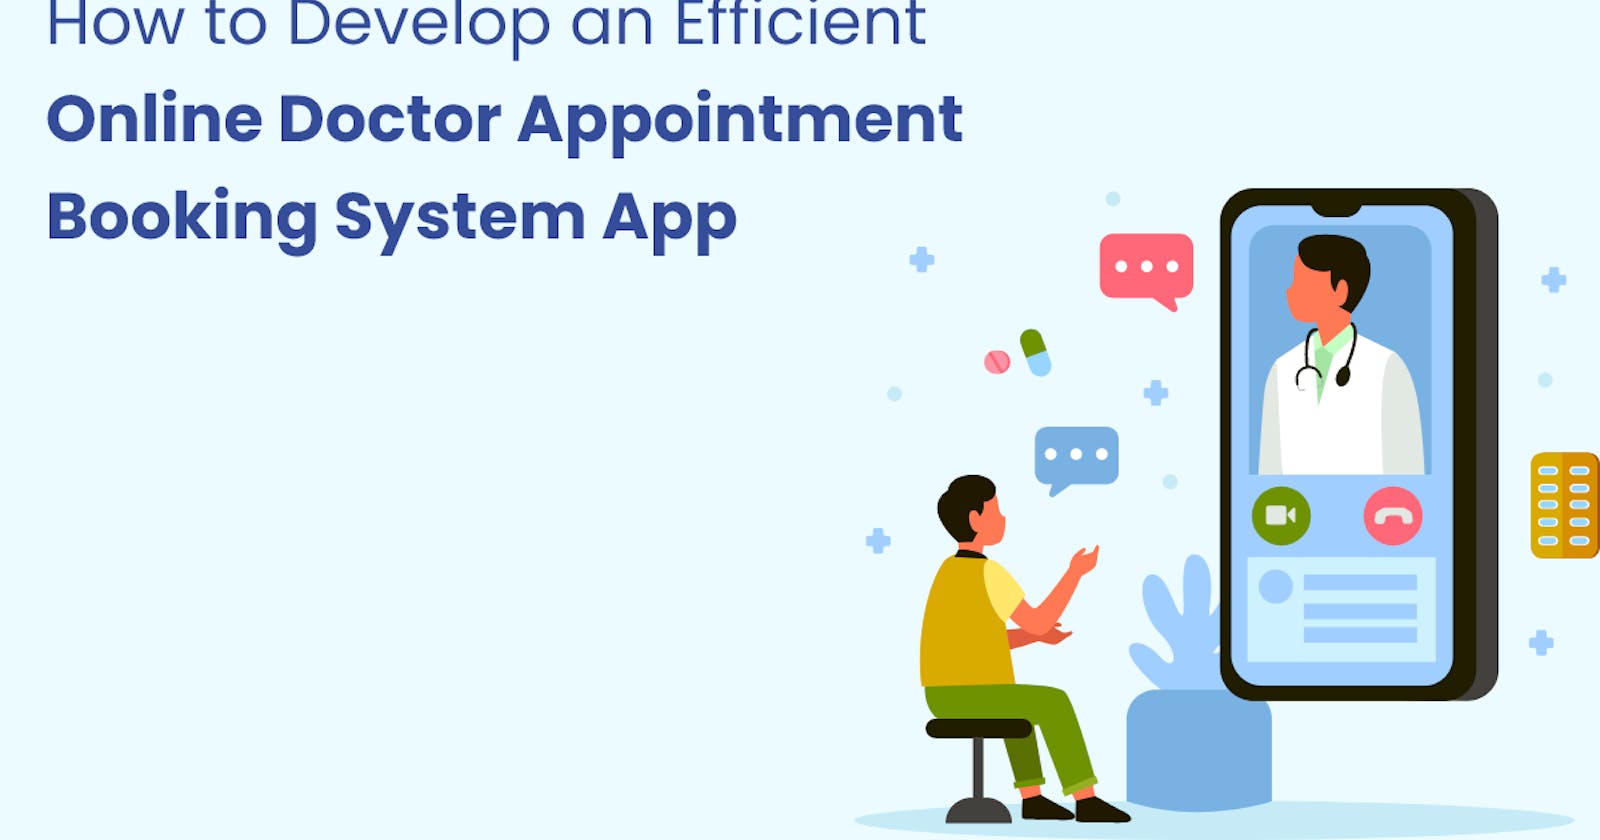 How to Develop an Efficient Online Doctor Appointment Booking System App